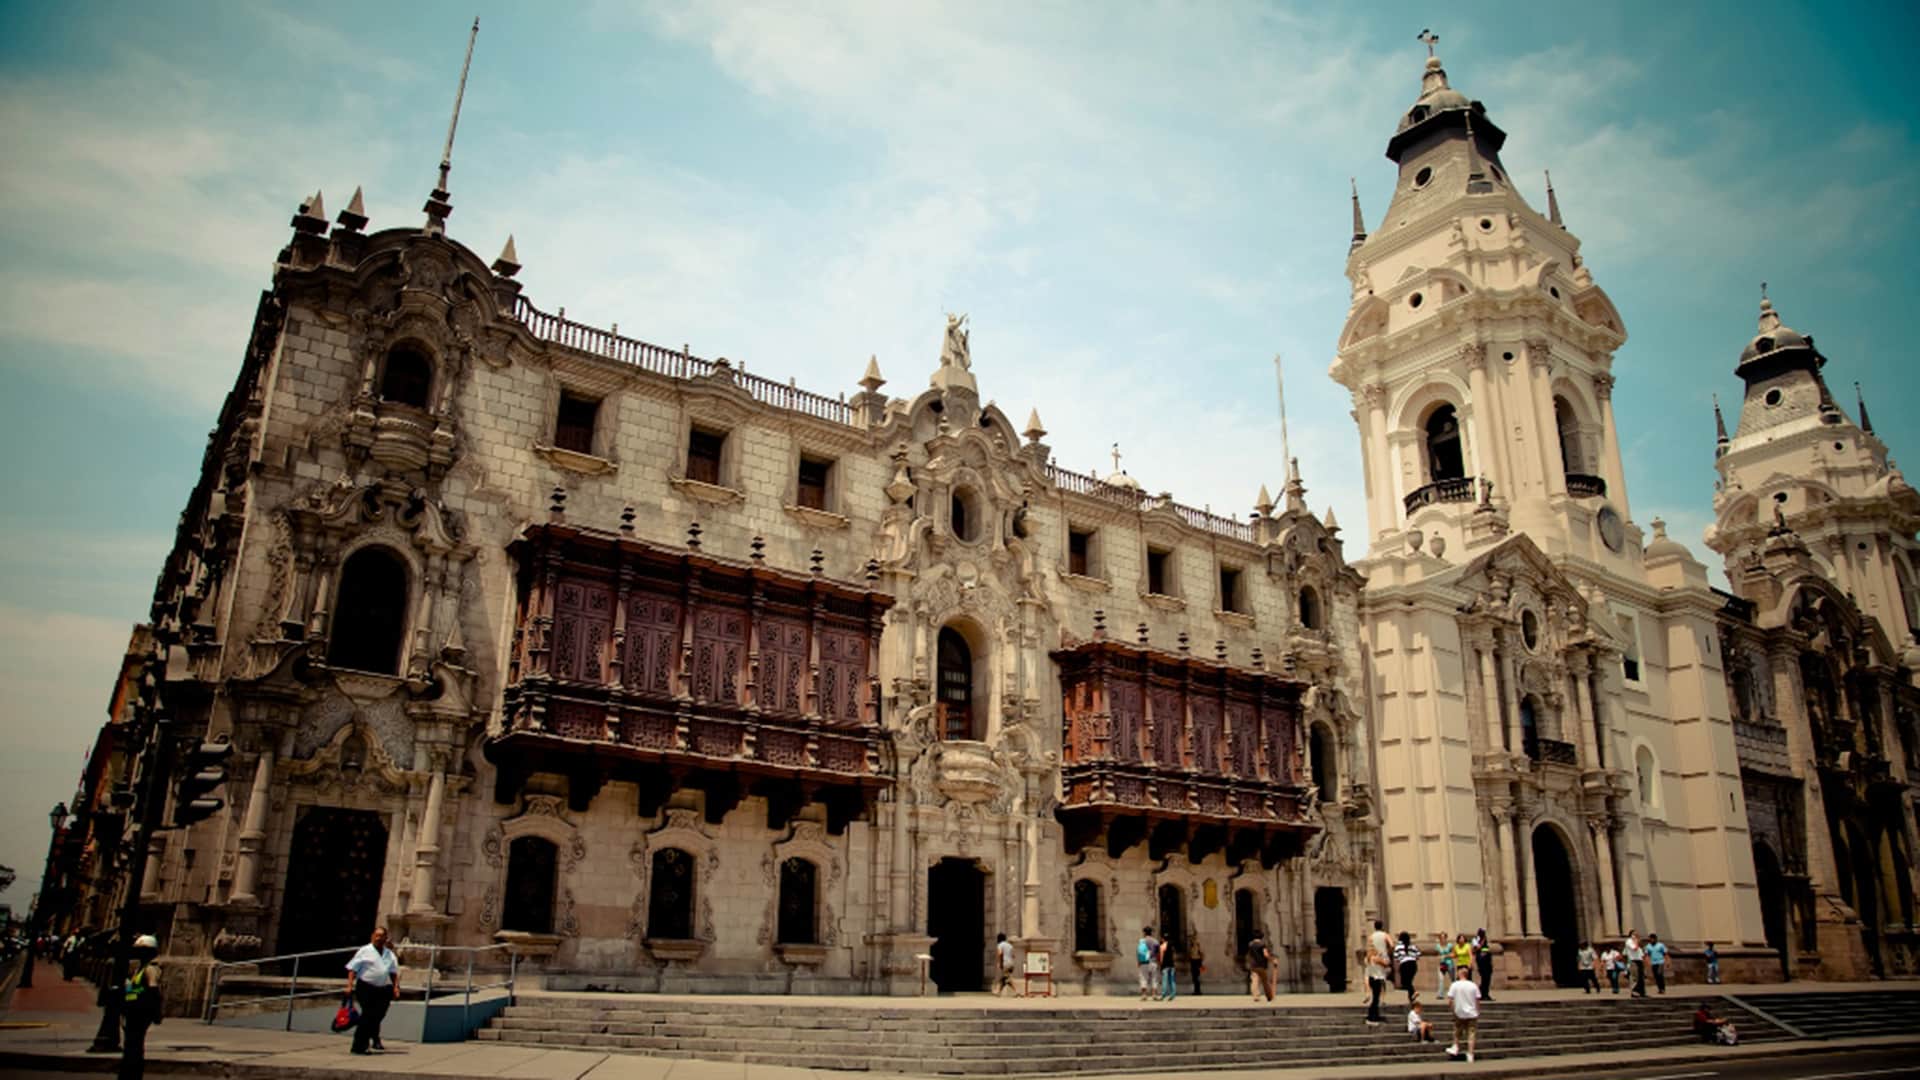 11Colonial building of the Archbishop's house or Lima's Cathedral | Responsible Travel Peru